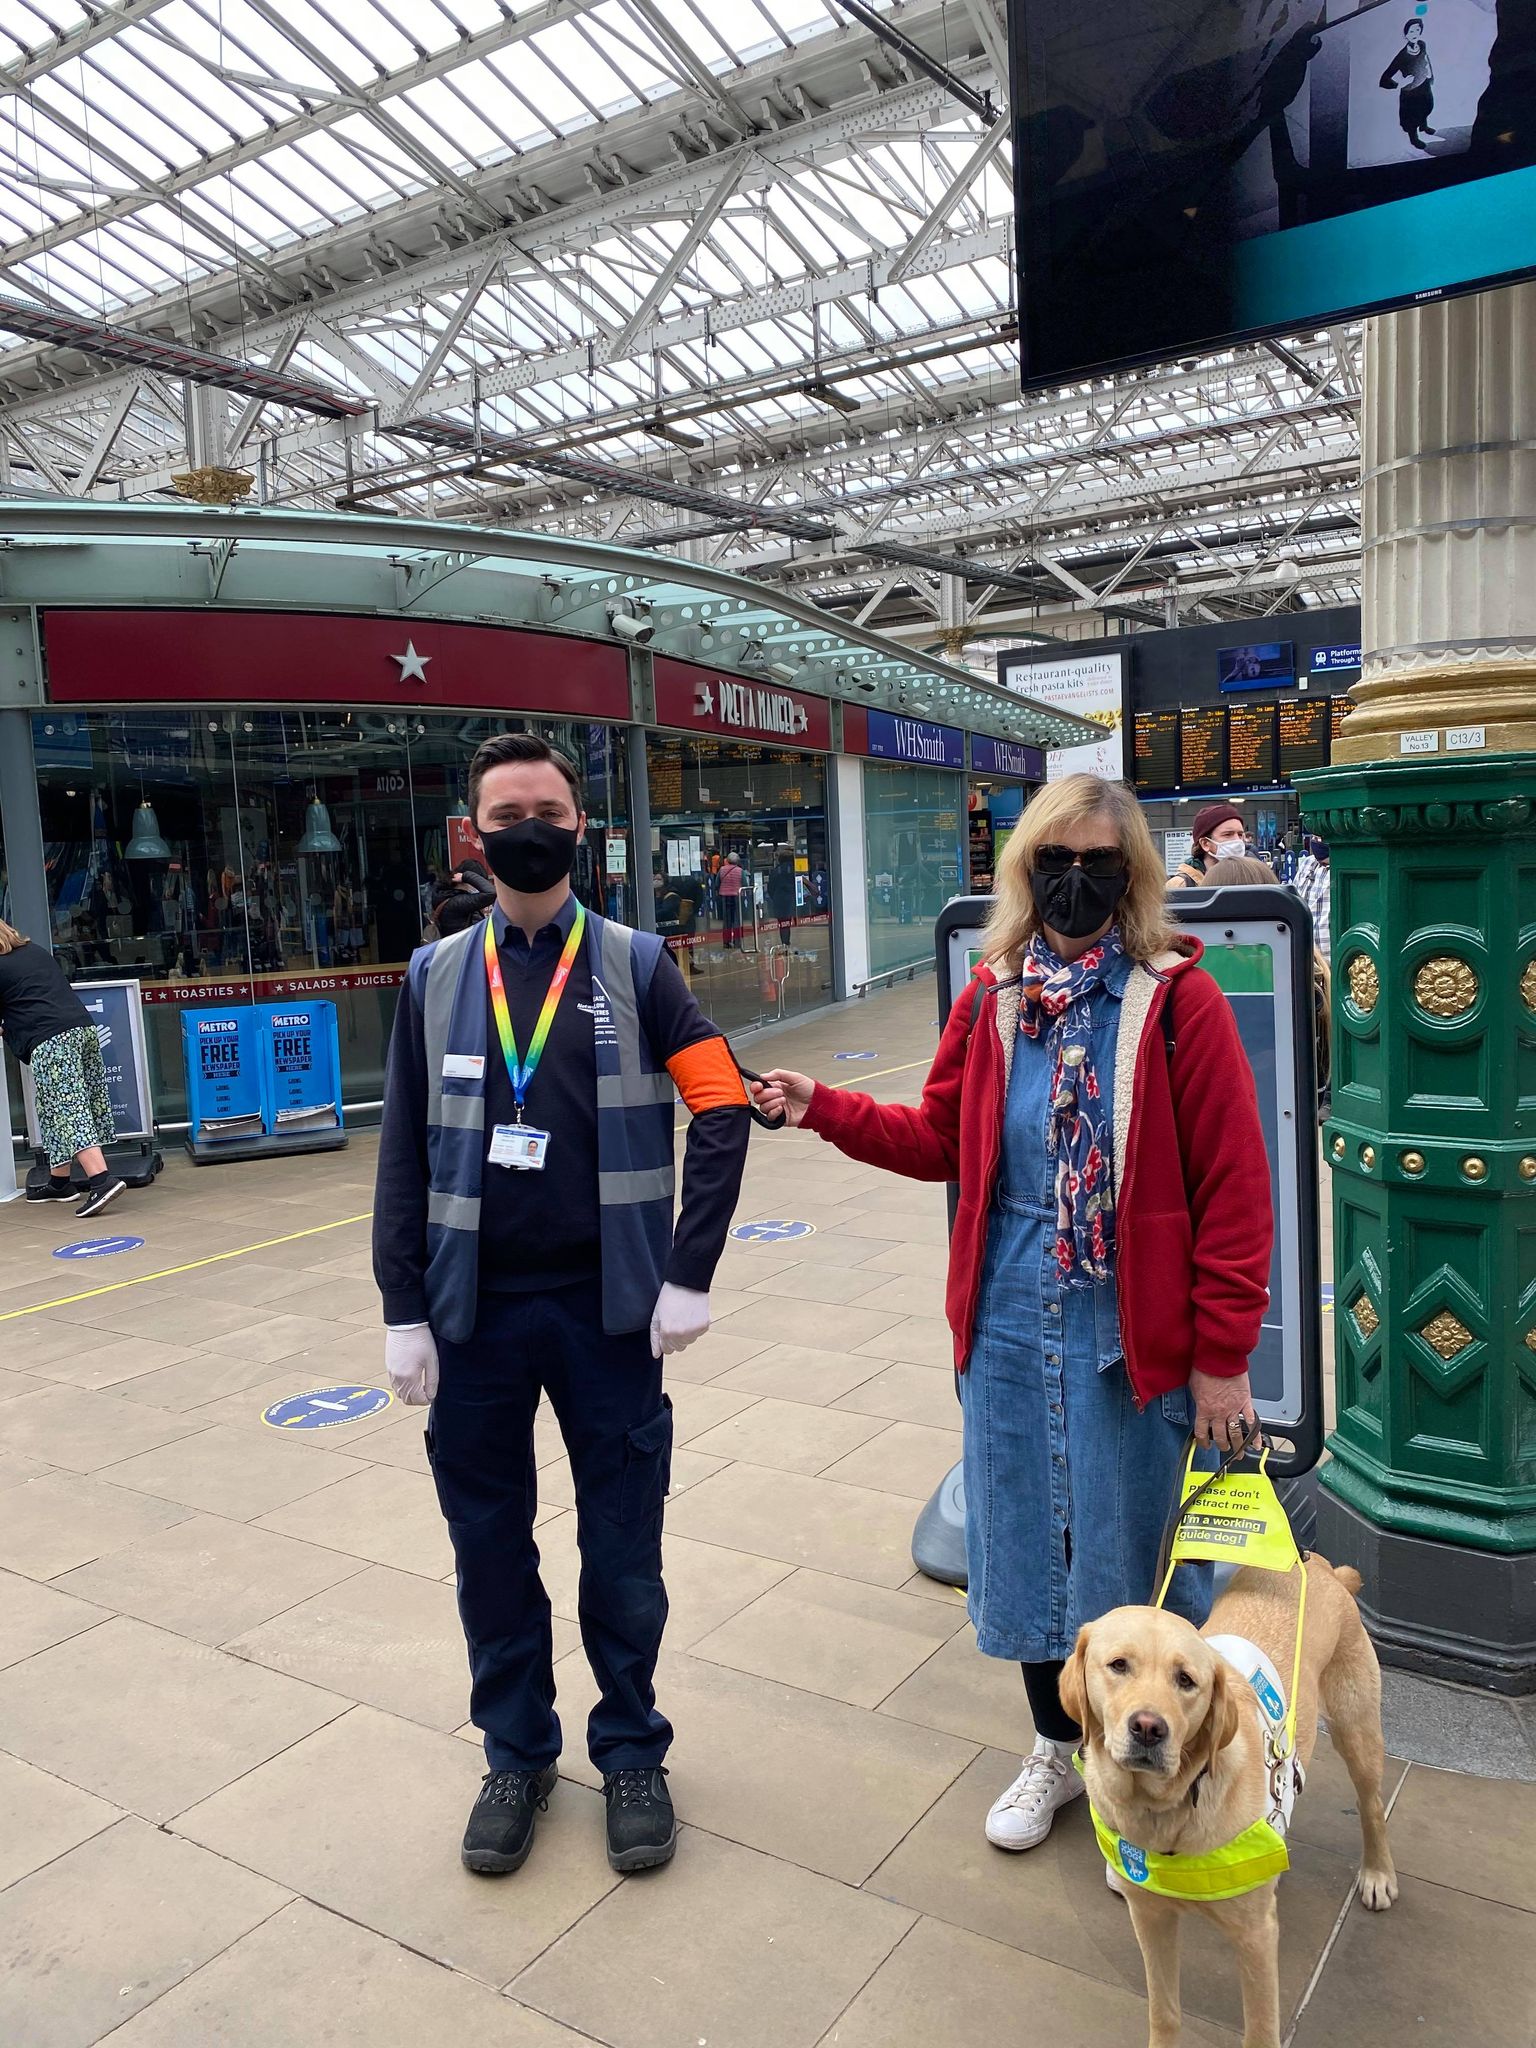 blind lady and her guide dog being guided by train staff using a ramble tag. they are in a train station